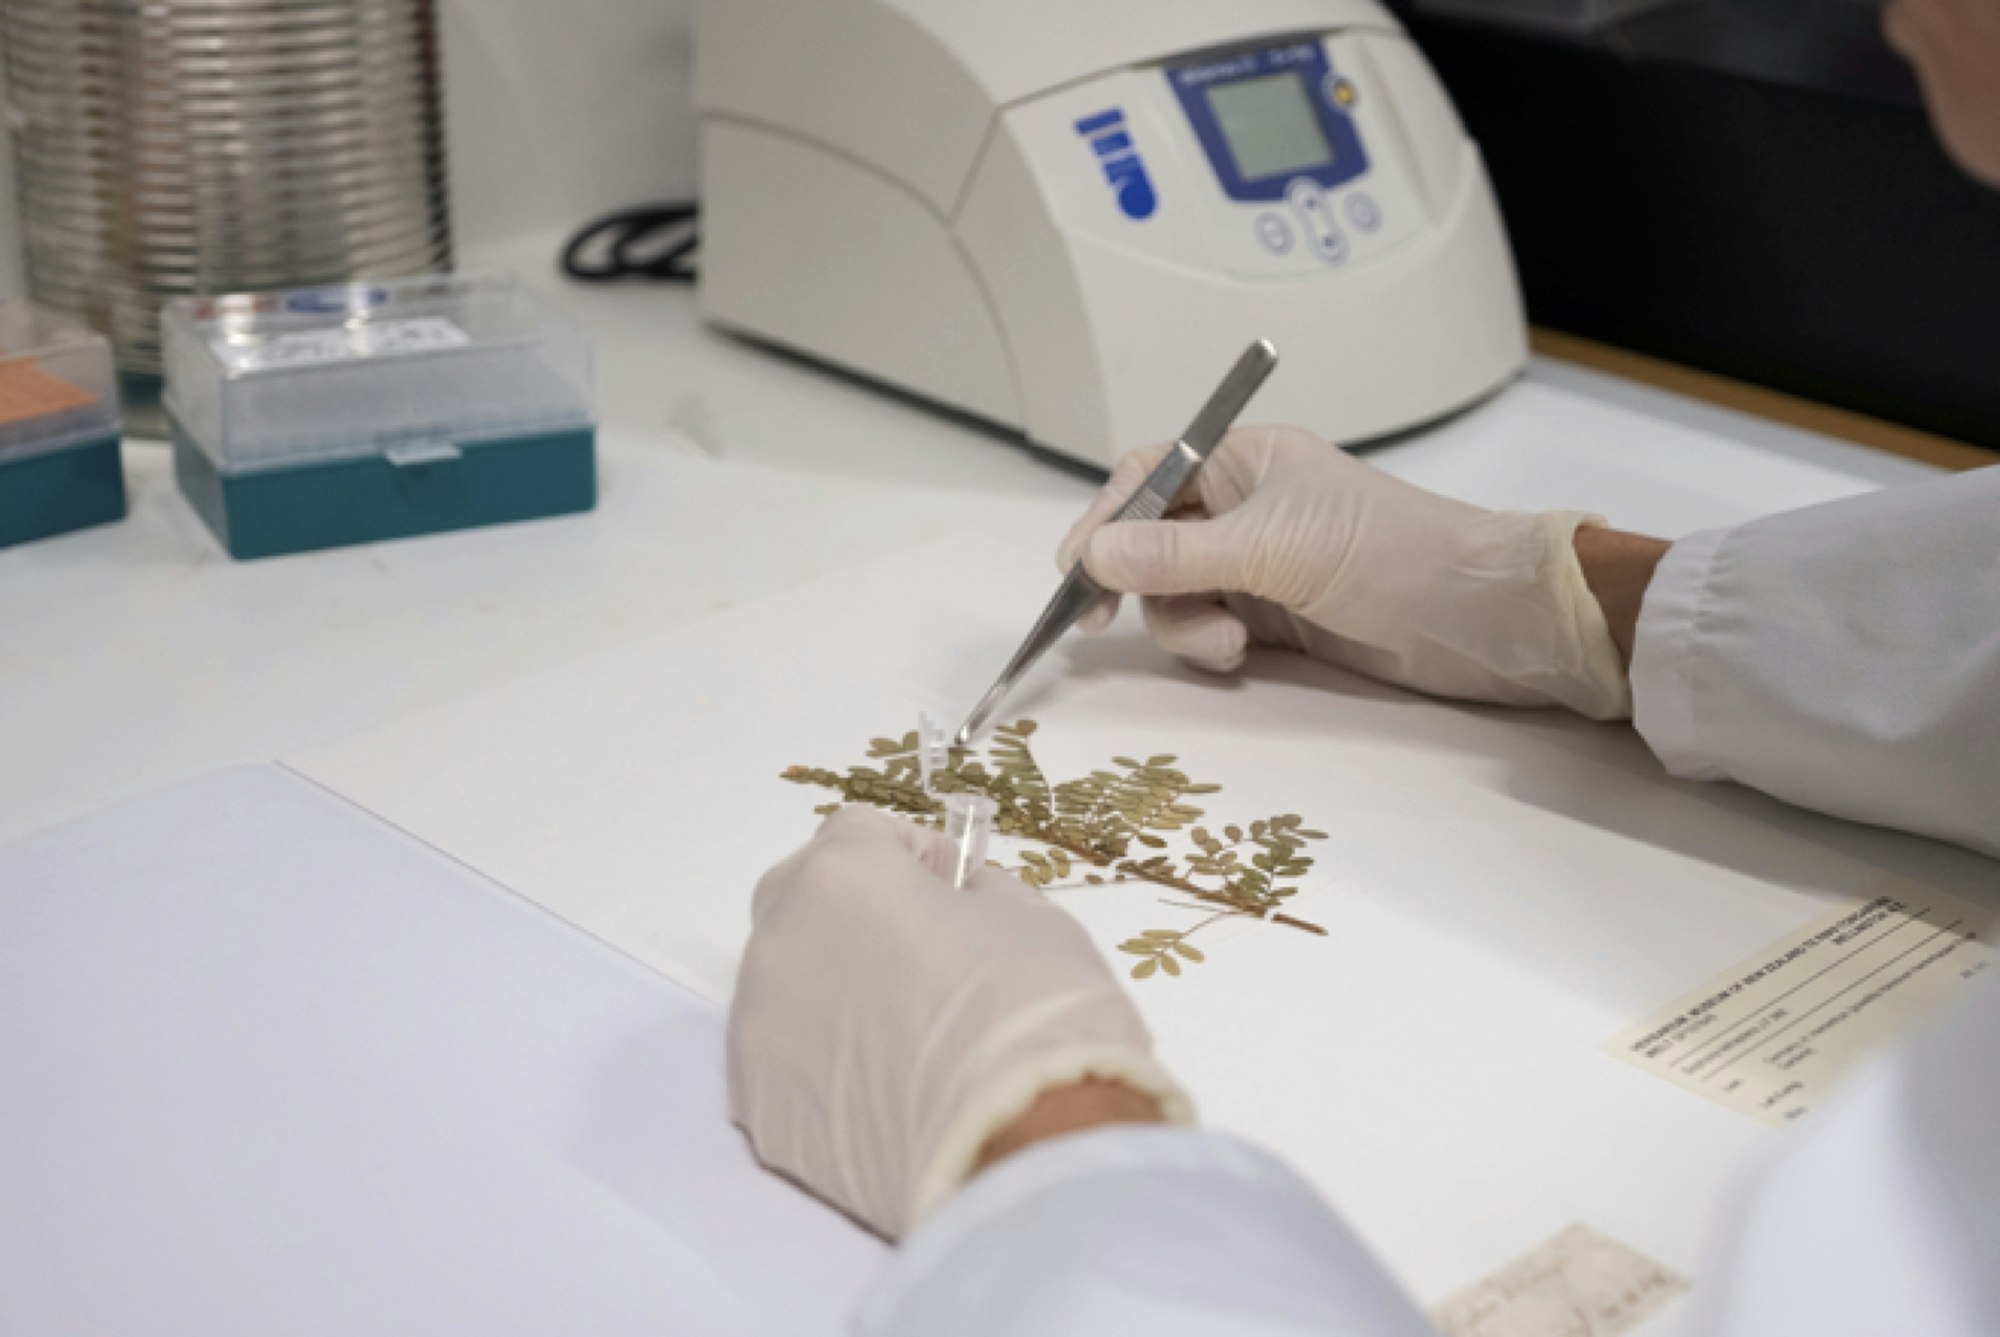 A scientist wearing white gloves creating a page with a plant specimen on it